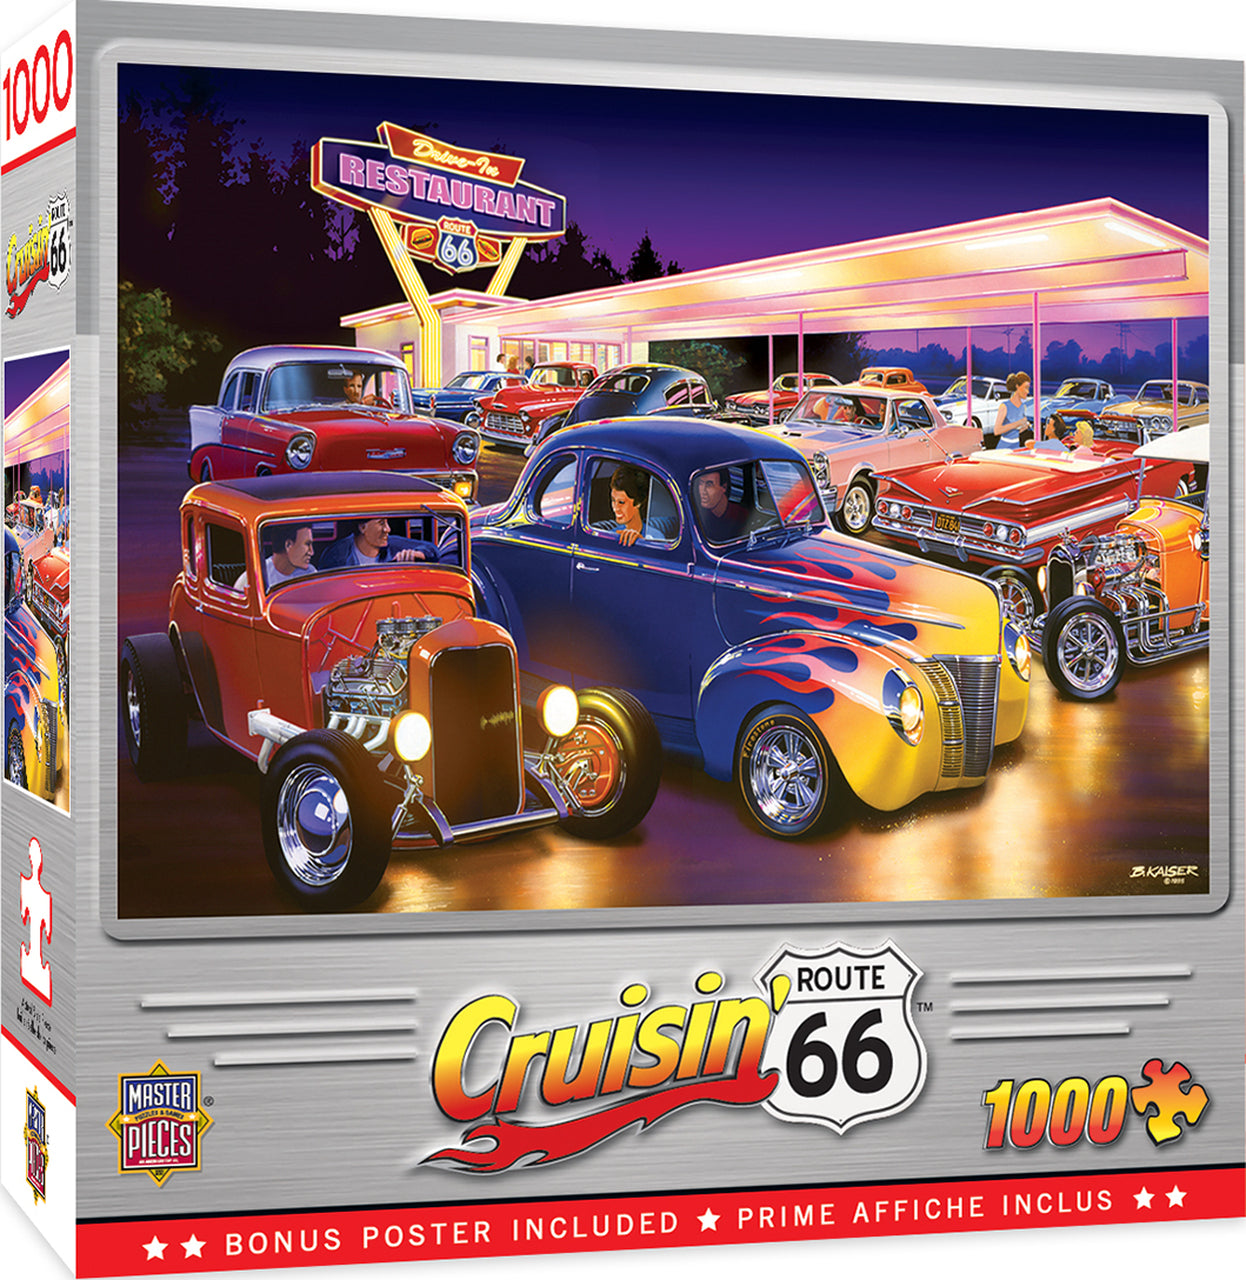 Cruisin" Route 66 Friday Night Hot Rods by Bruce Kaiser, 1000 Piece Puzzle